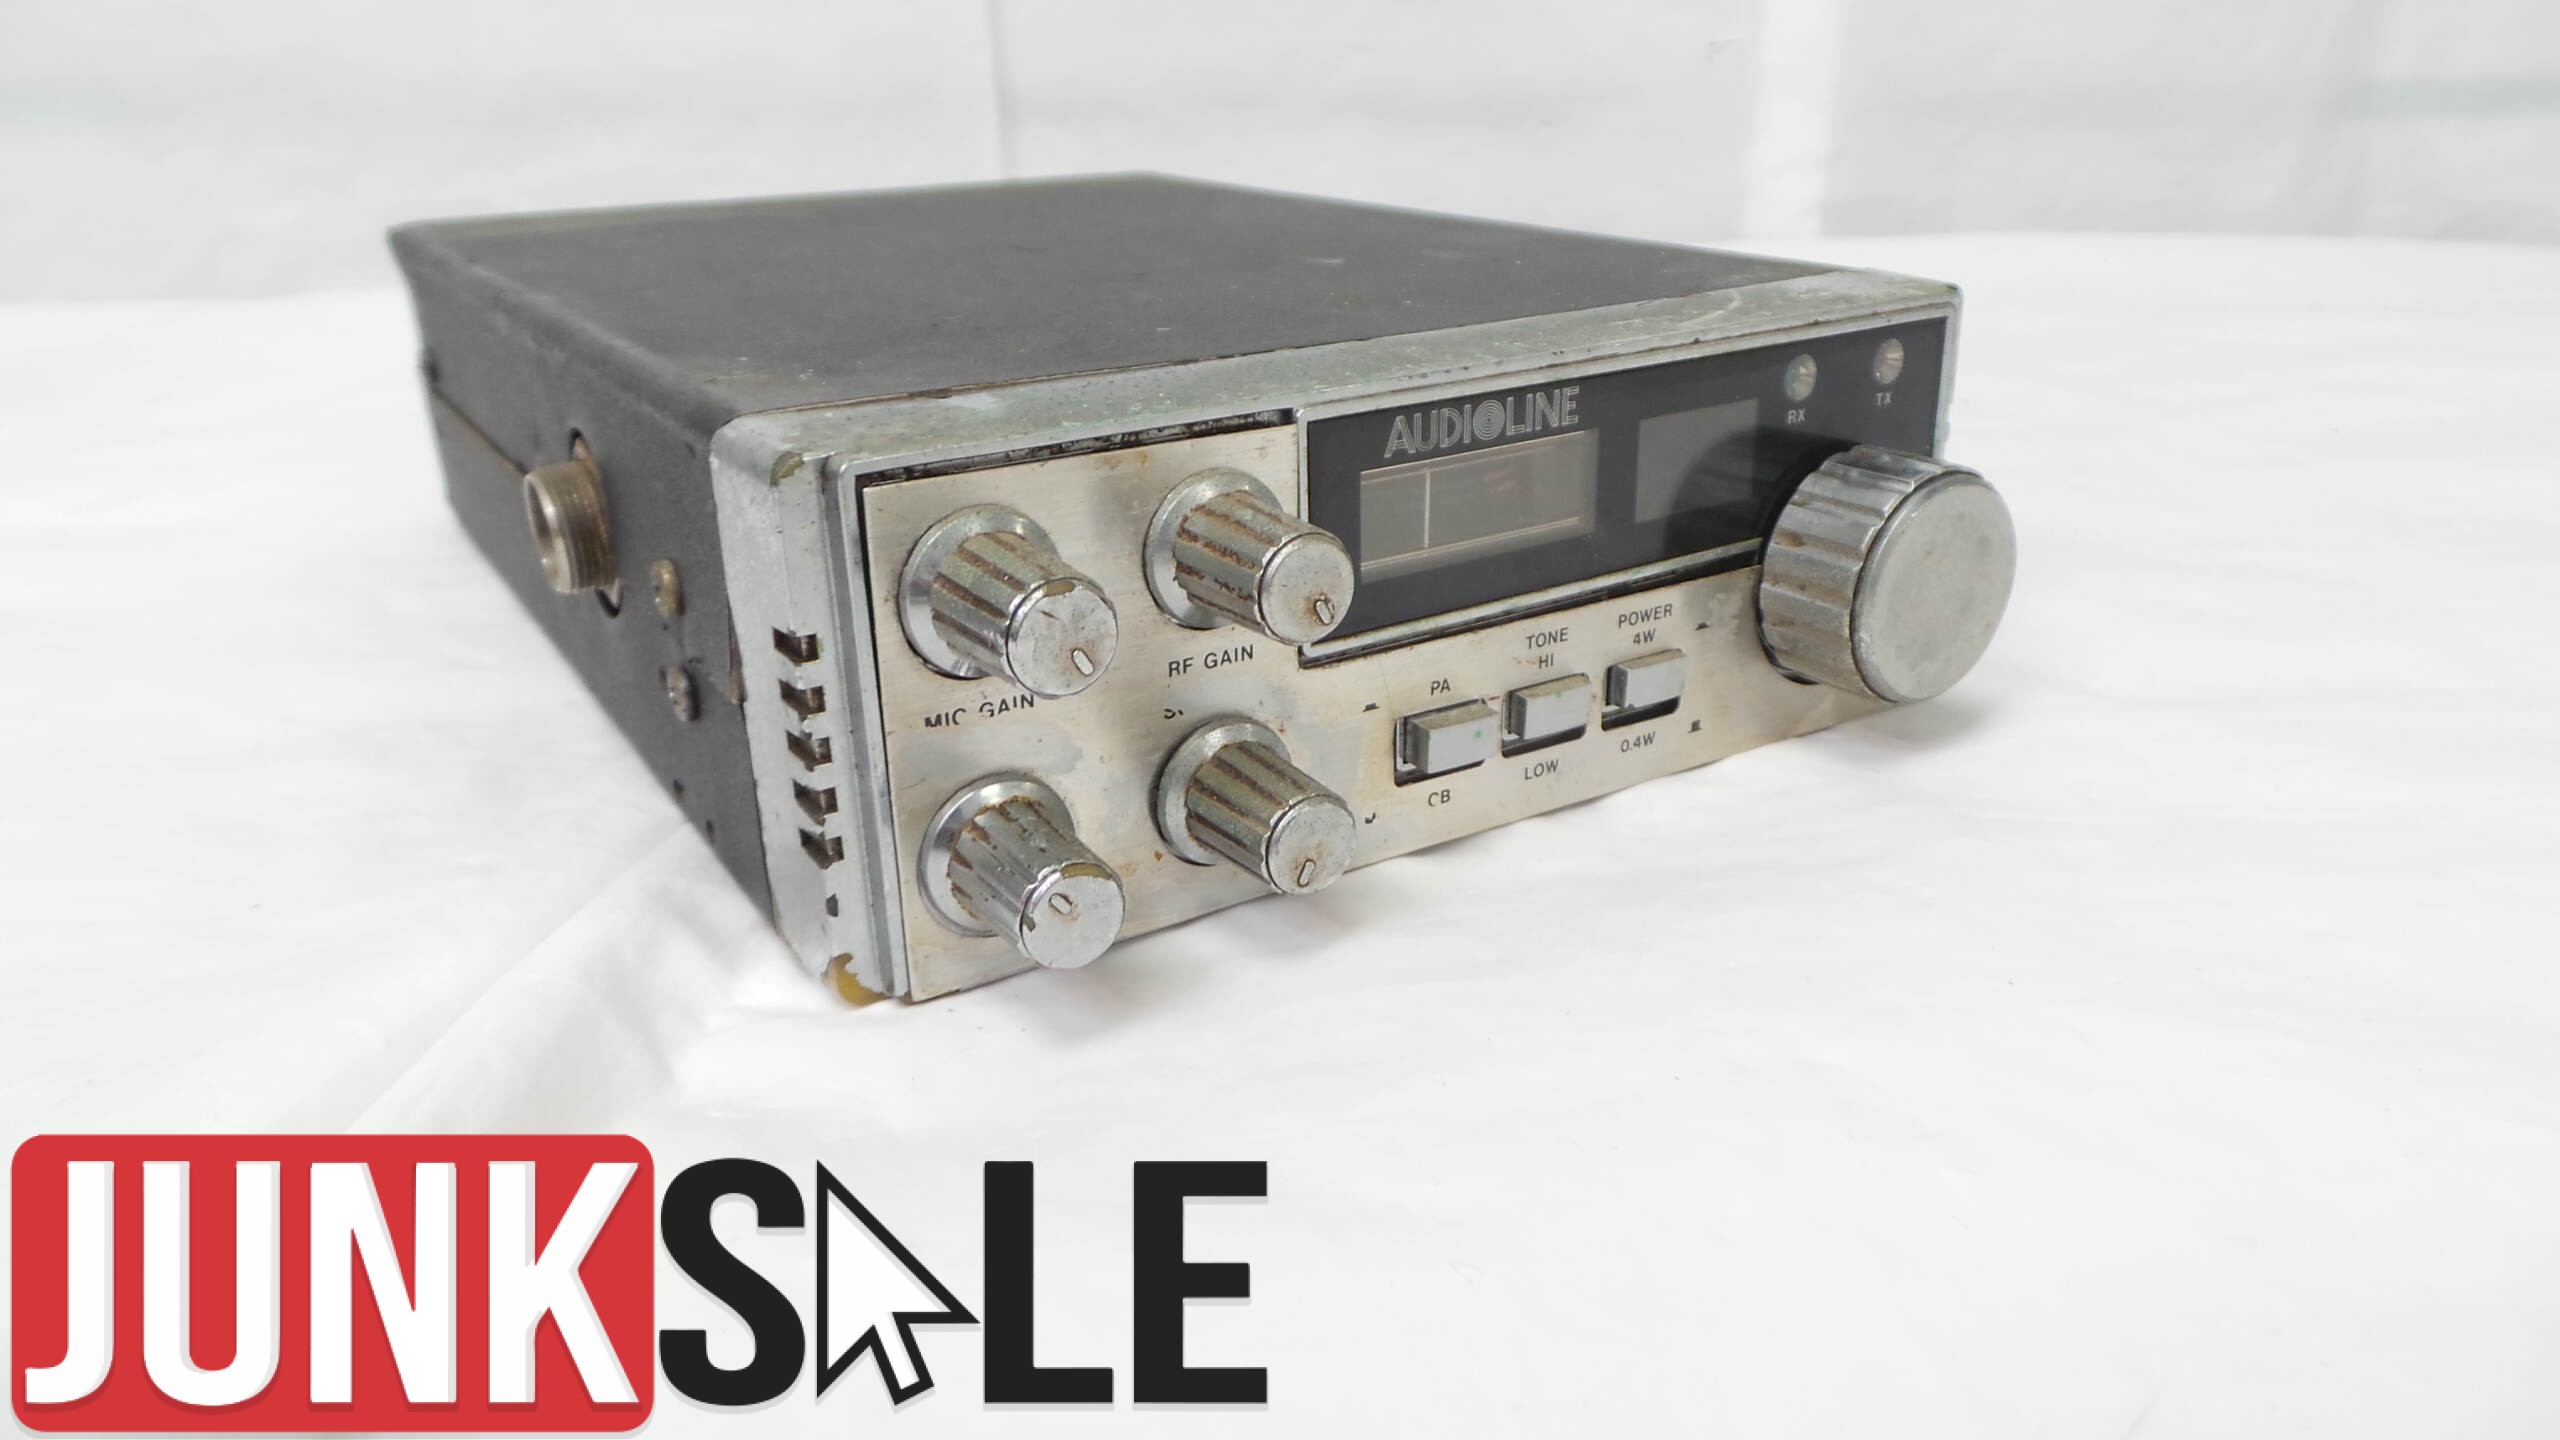 Audioline CB Radio Sold As Seen Junksale Clearance